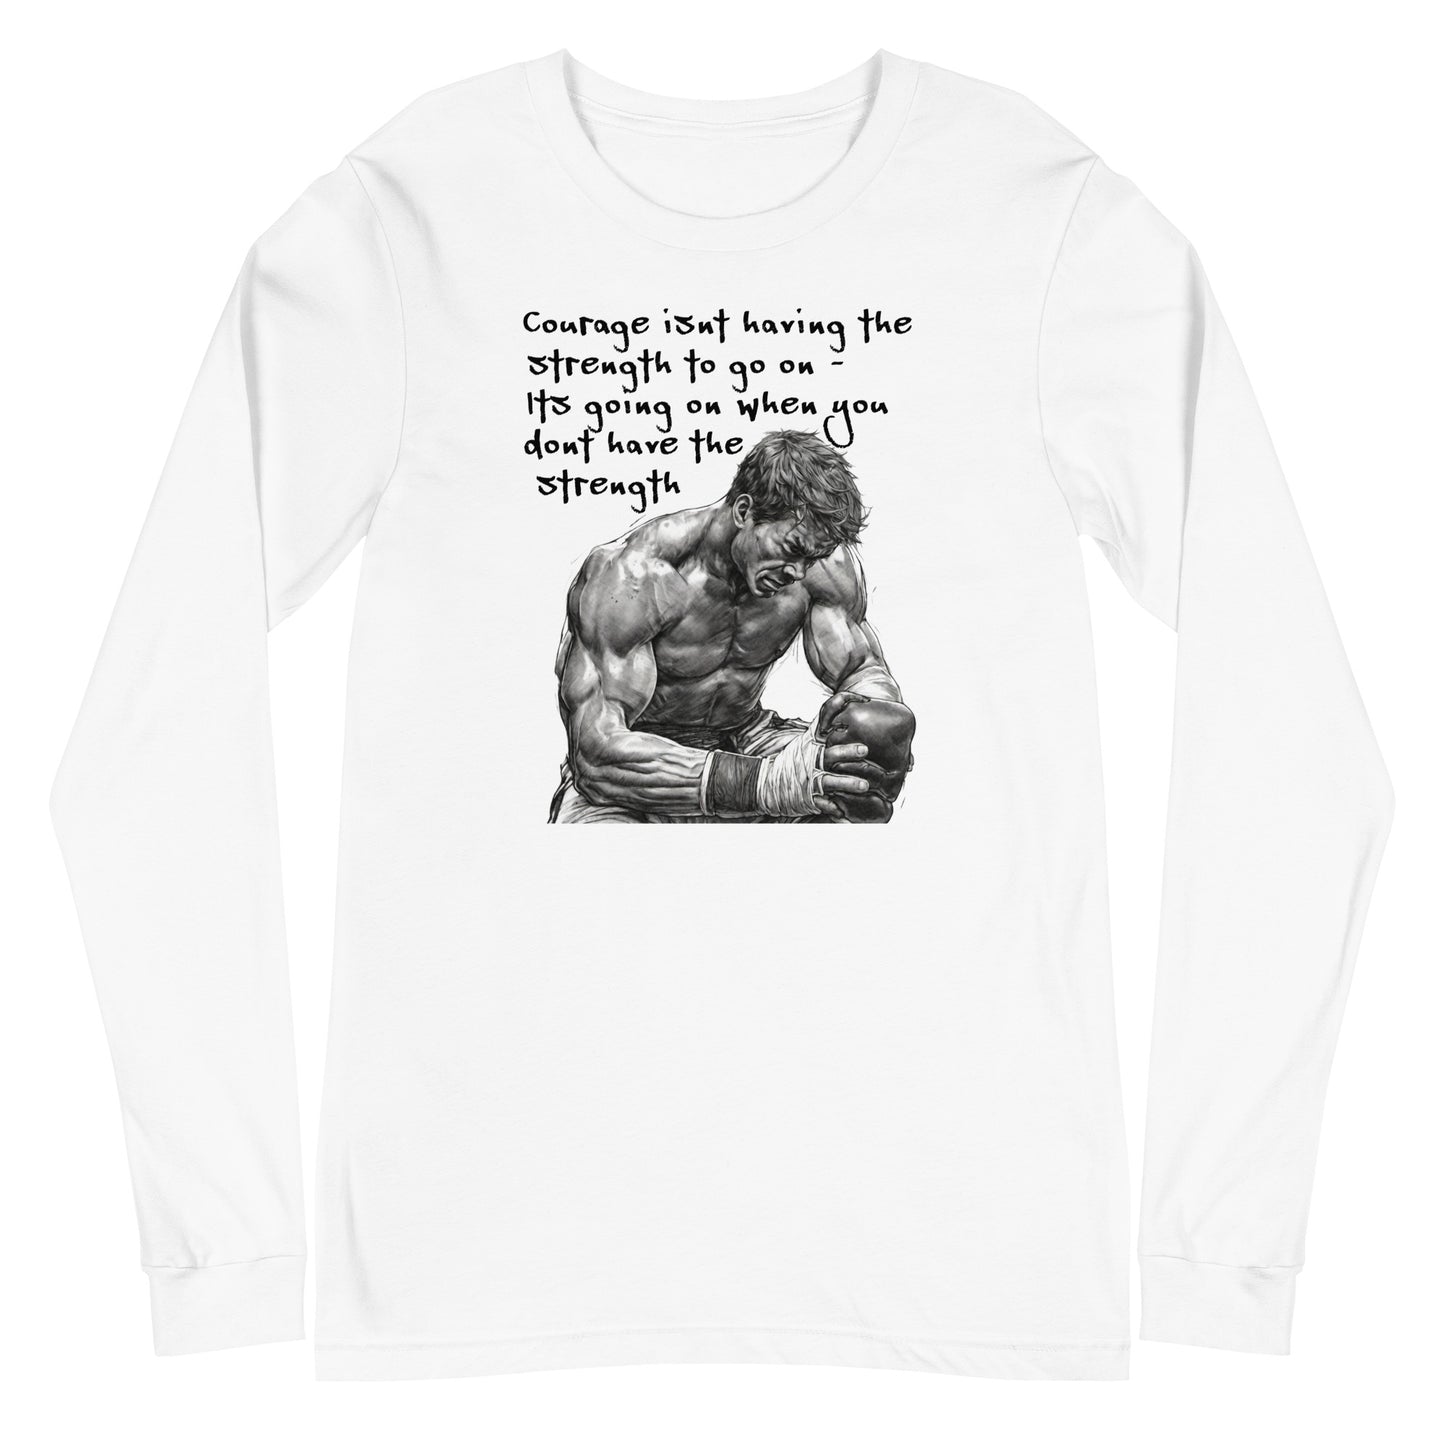 Courage and Strength Men's Long Sleeve Tee White